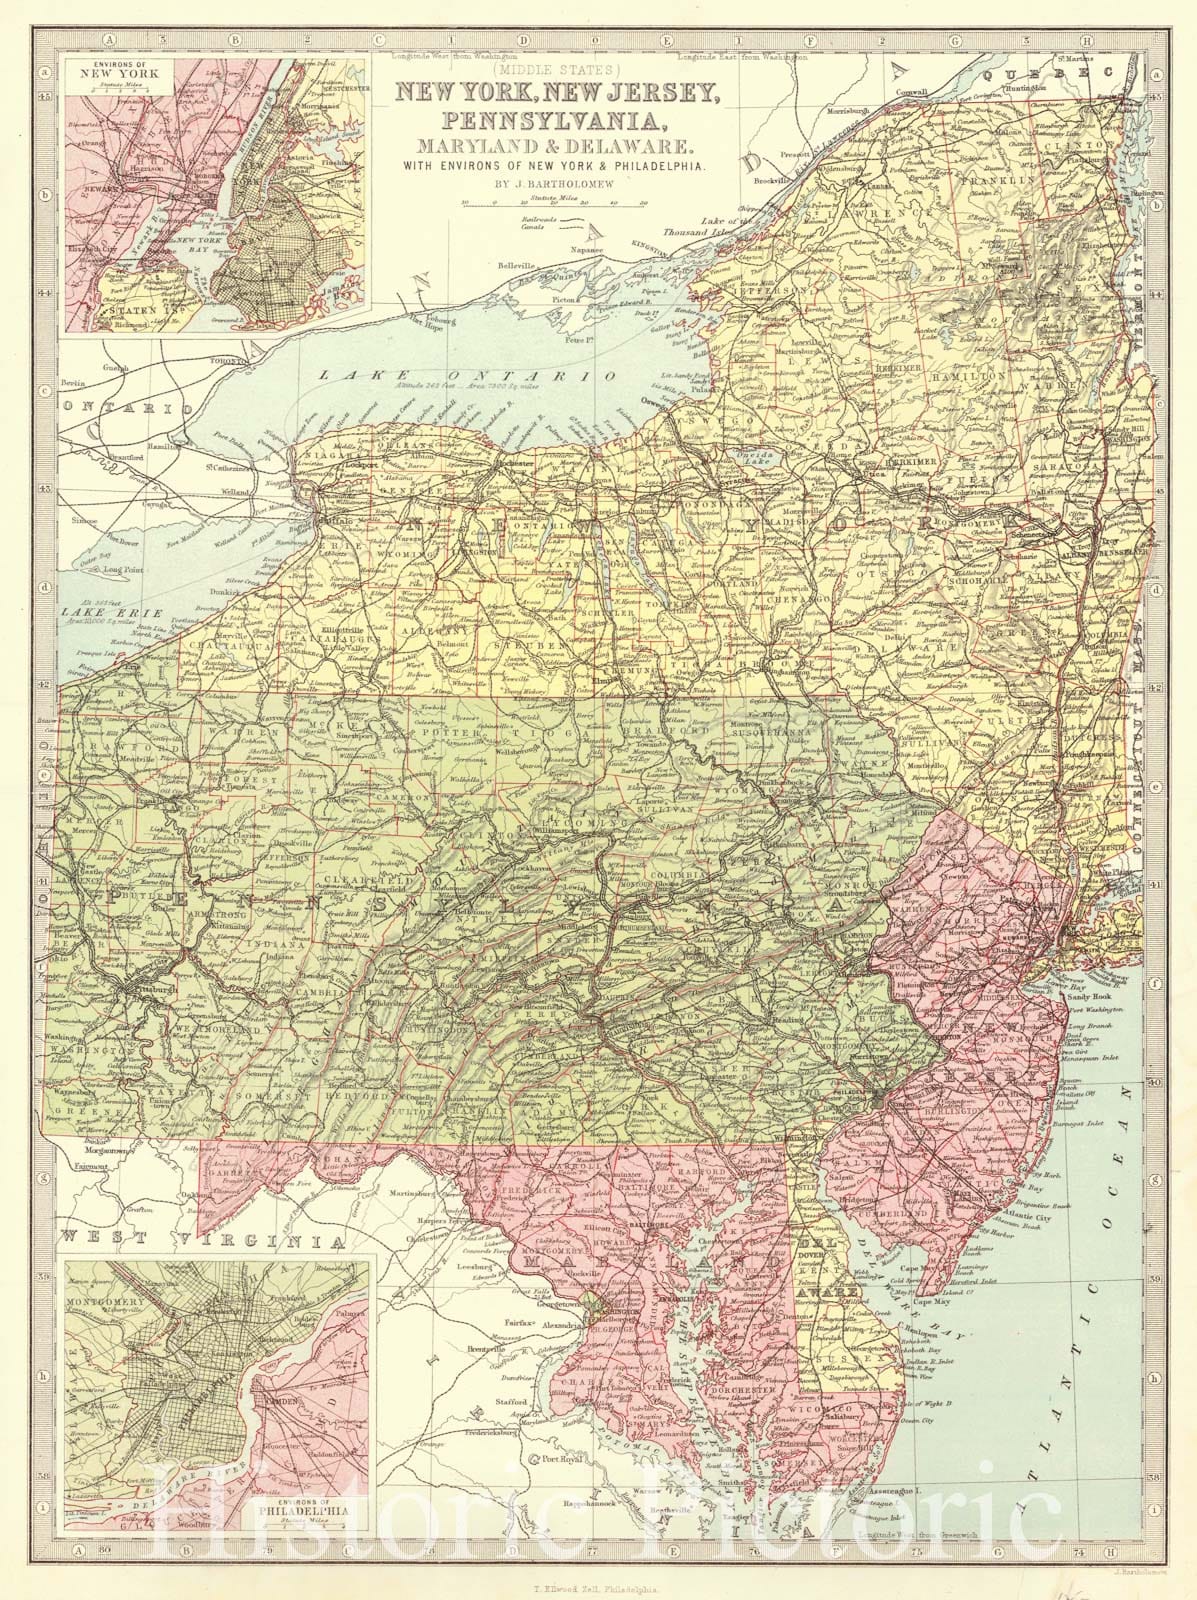 Historic Map : 1870 (Middle States) New York, New Jersey, Pennsylvania, Maryland, & Delaware with Environs of the New York and Philadelphia : Vintage Wall Art